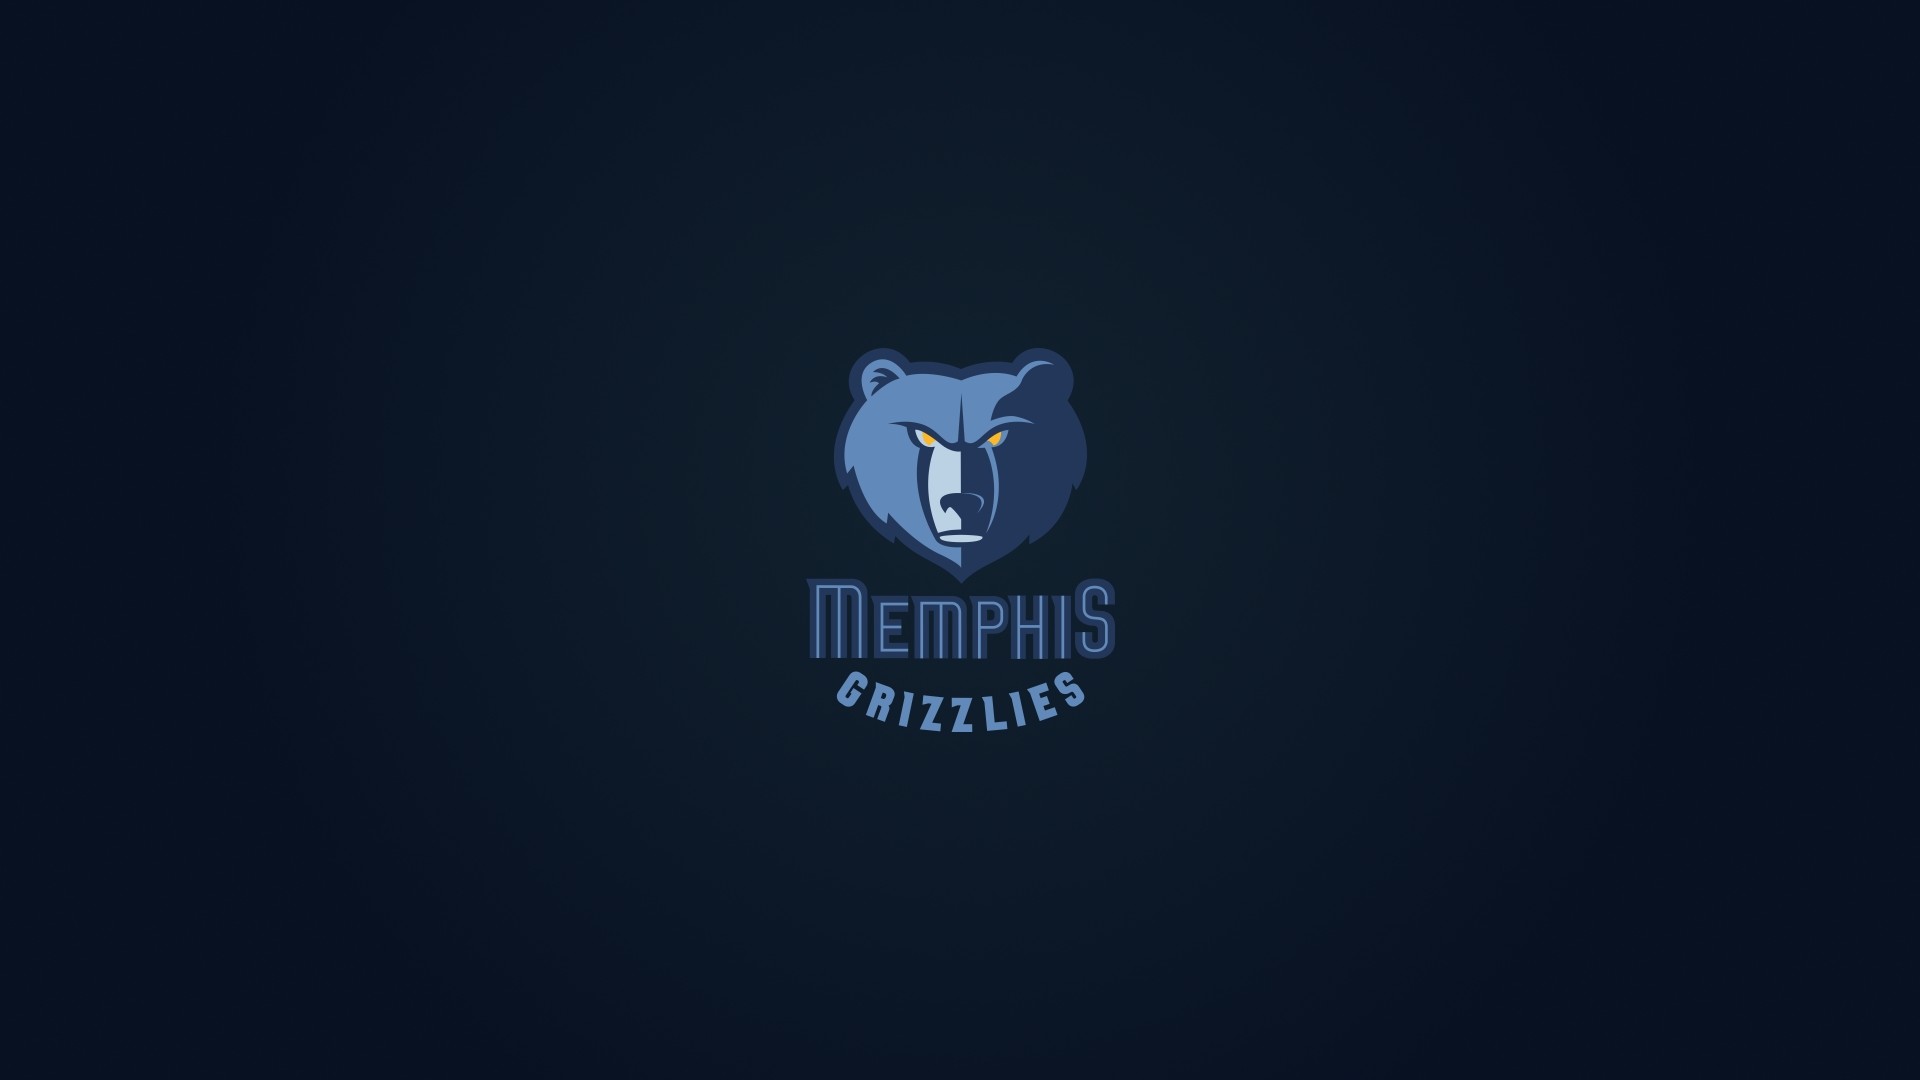 Memphis Grizzlies Wallpaper For Mac Backgrounds with high-resolution 1920x1080 pixel. You can use this wallpaper for your Desktop Computer Backgrounds, Windows or Mac Screensavers, iPhone Lock screen, Tablet or Android and another Mobile Phone device